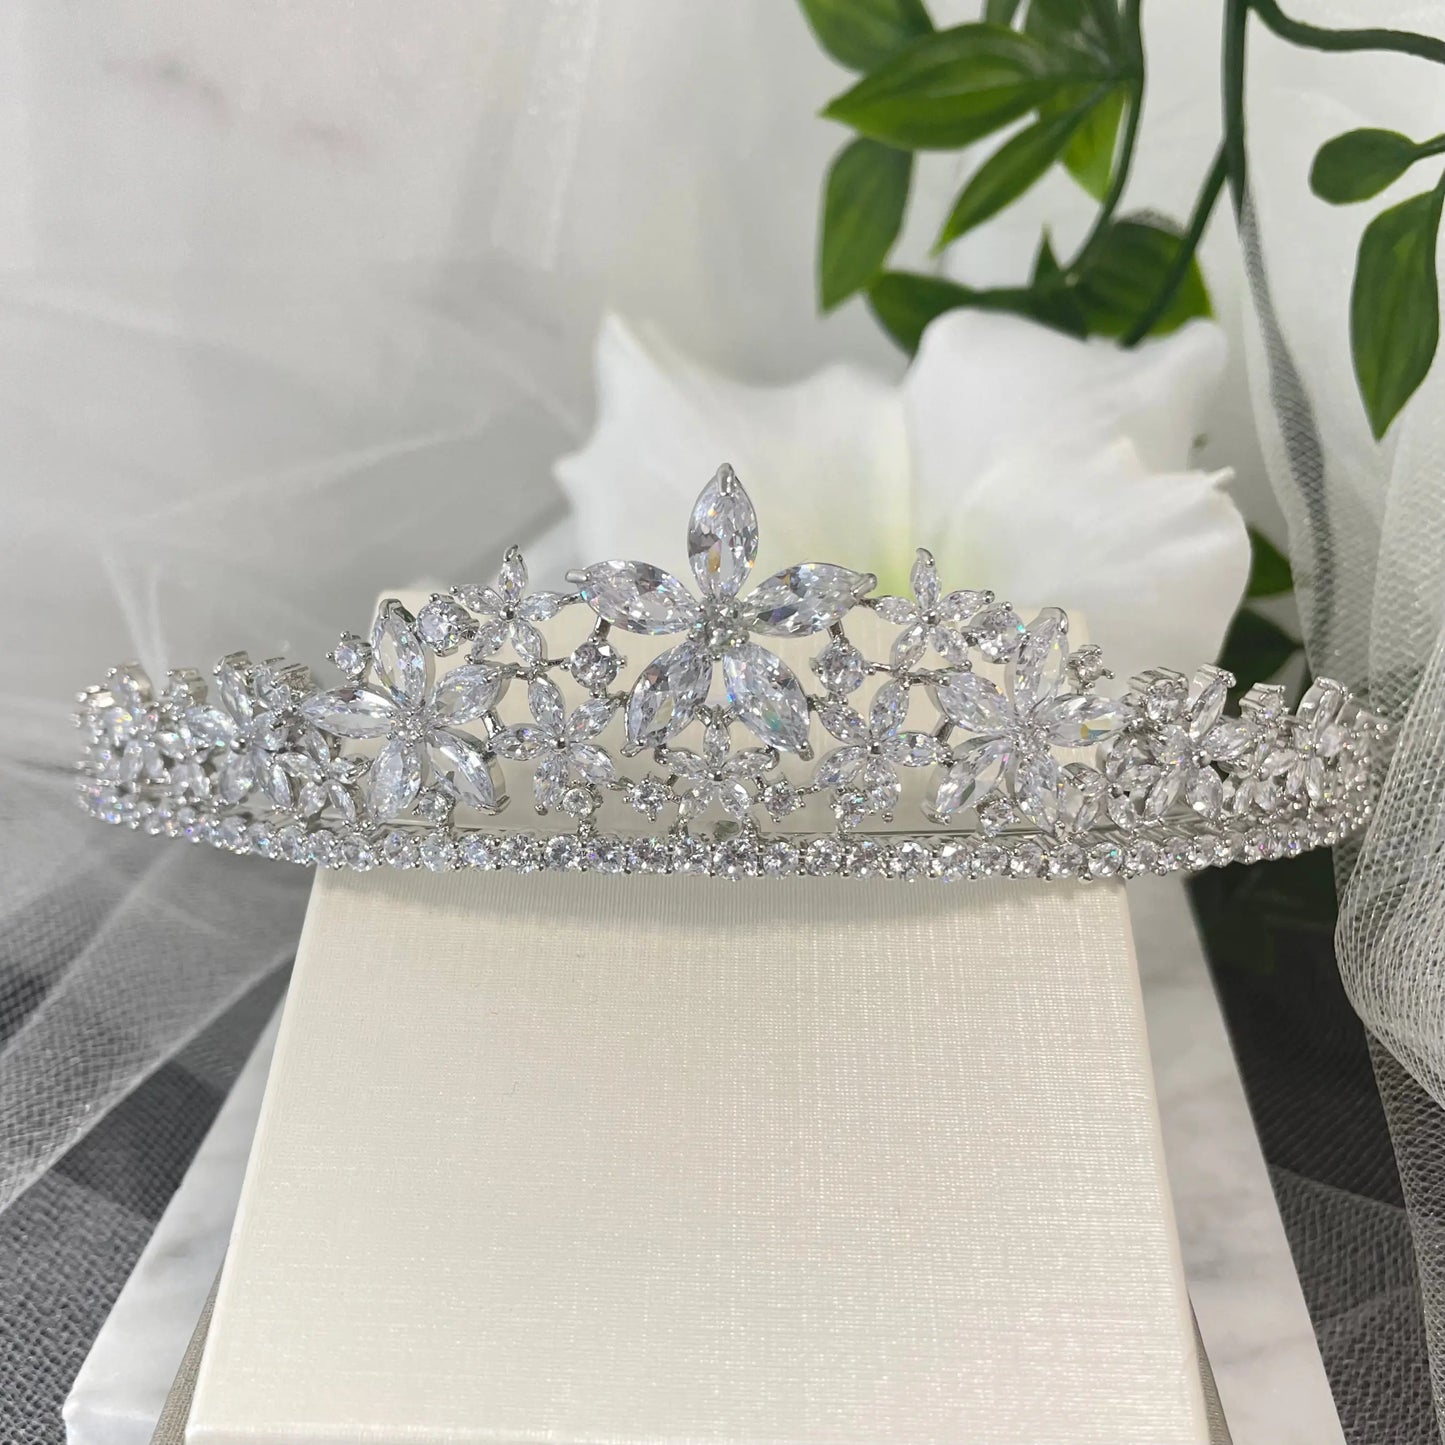 Brianna Bridal Tiara, featuring a stunning floral design with sparkling zirconia crystals, perfect for adding elegance and brilliance to any bridal outfit.